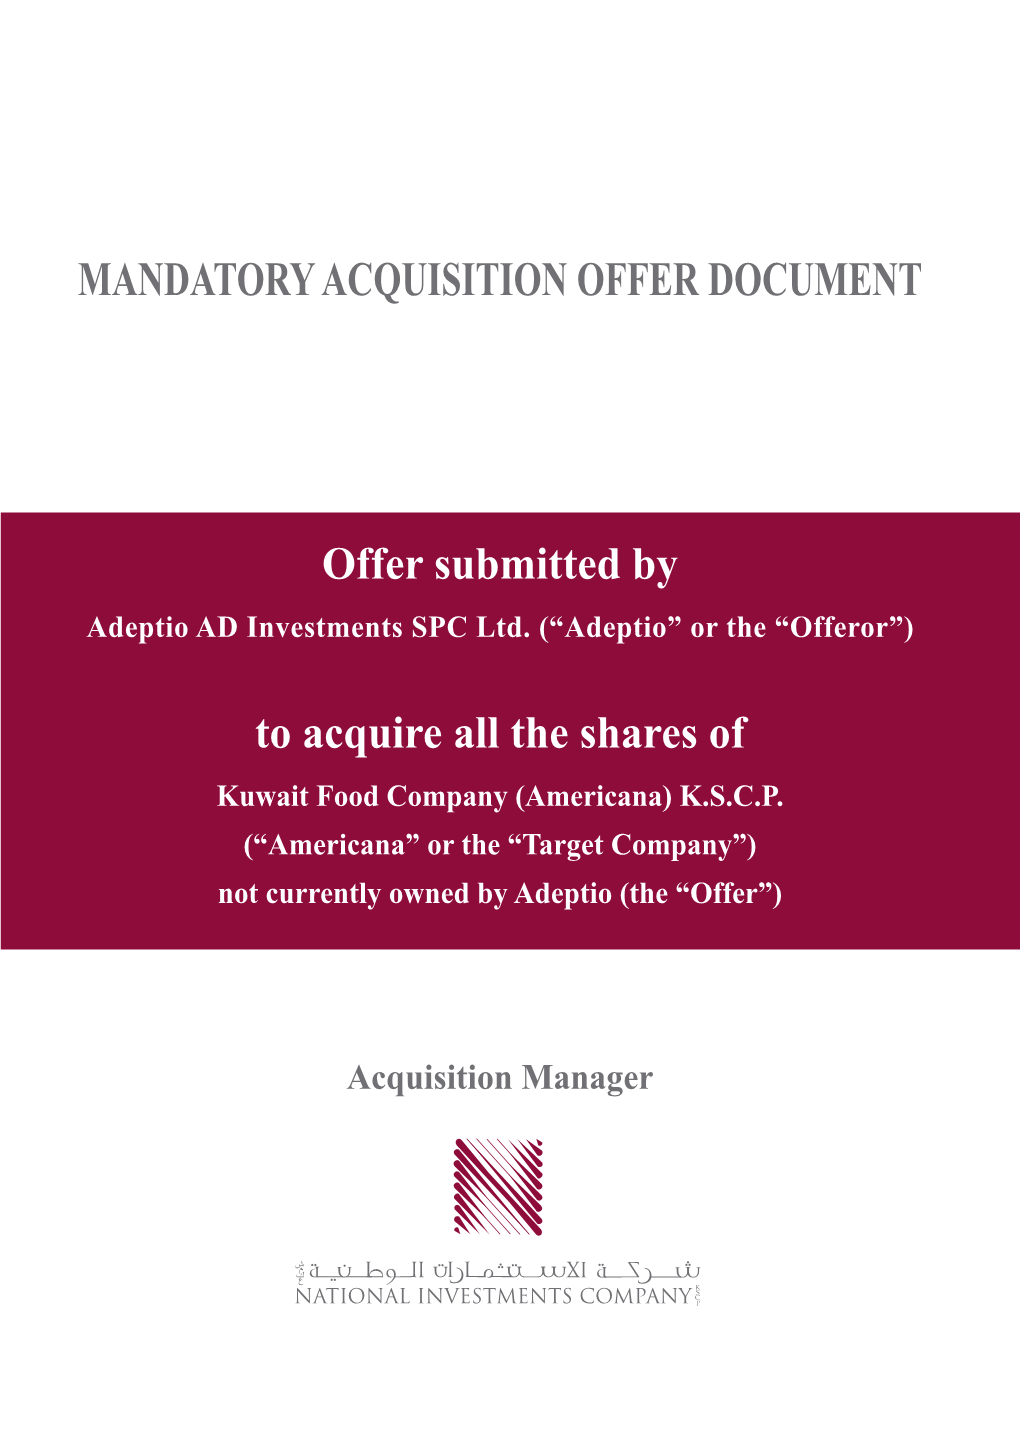 1) Mandatory Acquisition Offer Document